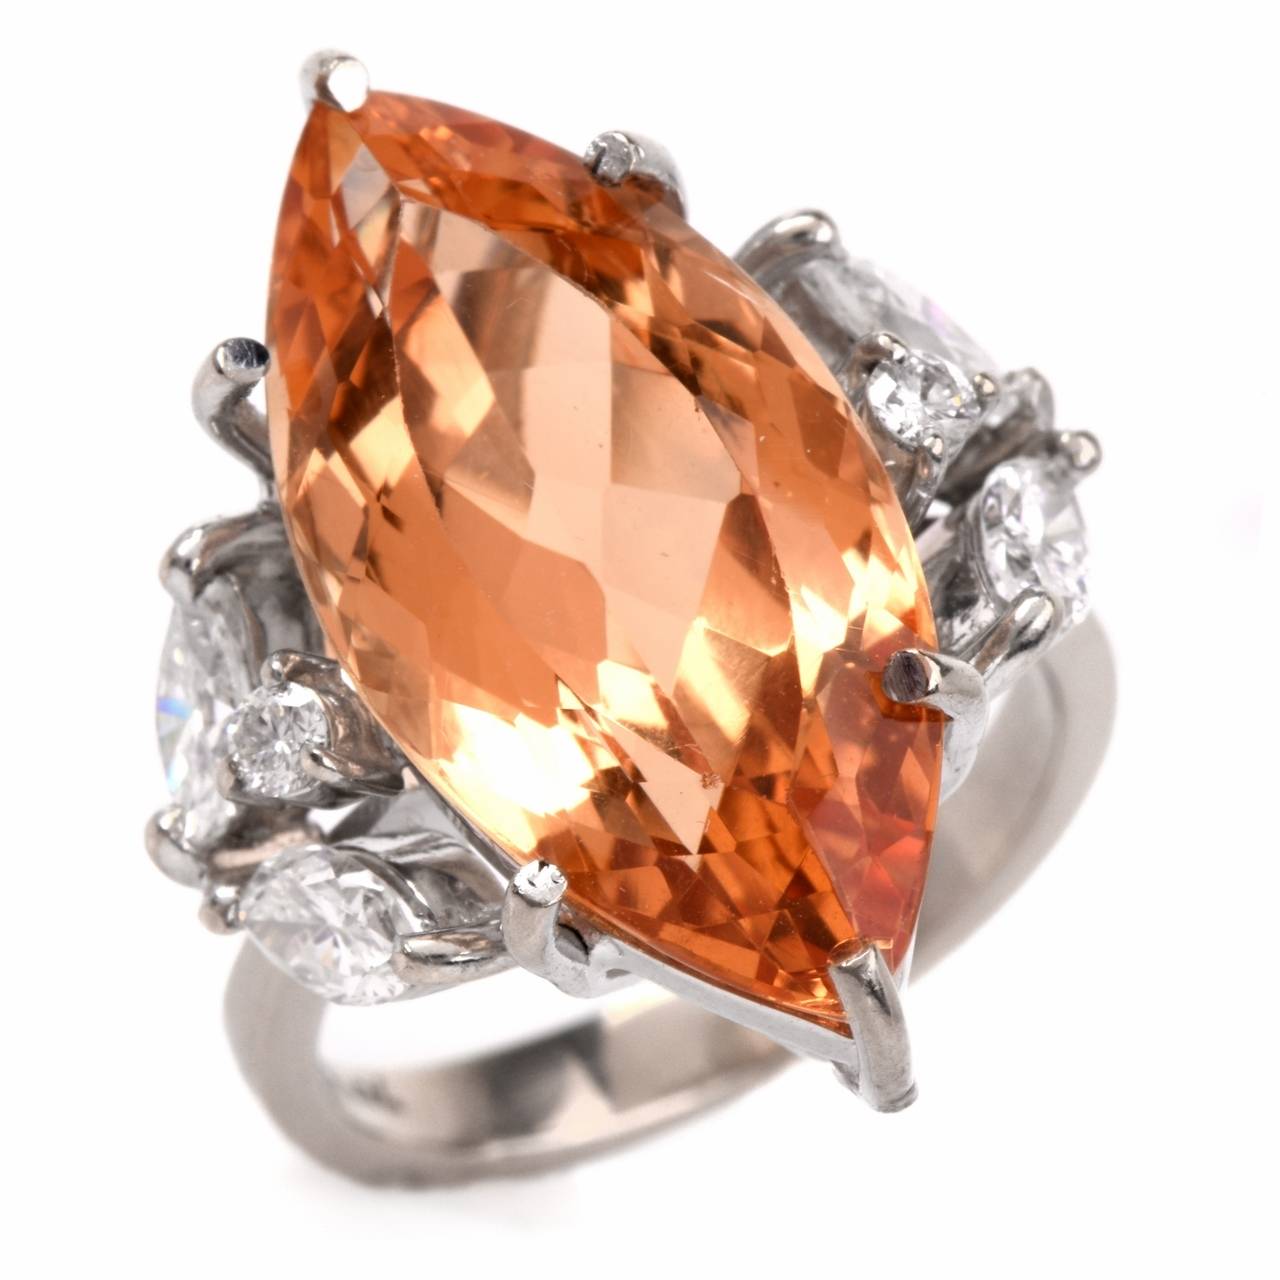 This Vintage cocktail ring with a naturaI and untreated marquise-faceted Imperial topaz of an enchanting intense golden yellow color approx. 10.35, marquise and round-faceted diamonds is crafted in solid 18K yellow gold and weighs 7.2 grams.  The